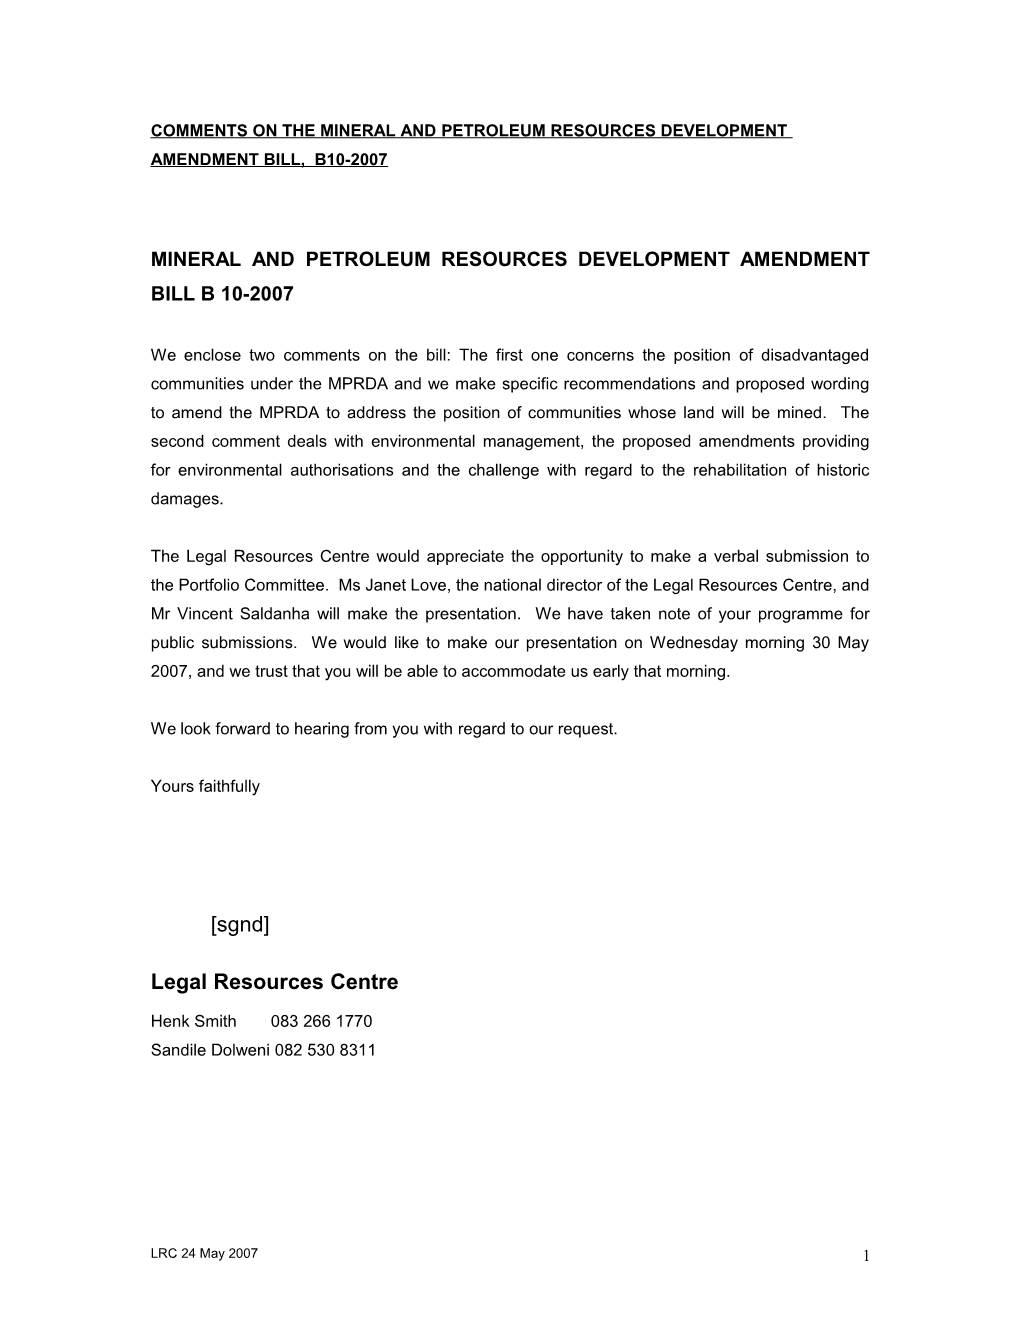 Comments on the Mineral and Petroleum Resources Development Amendment Bill, B10-2007